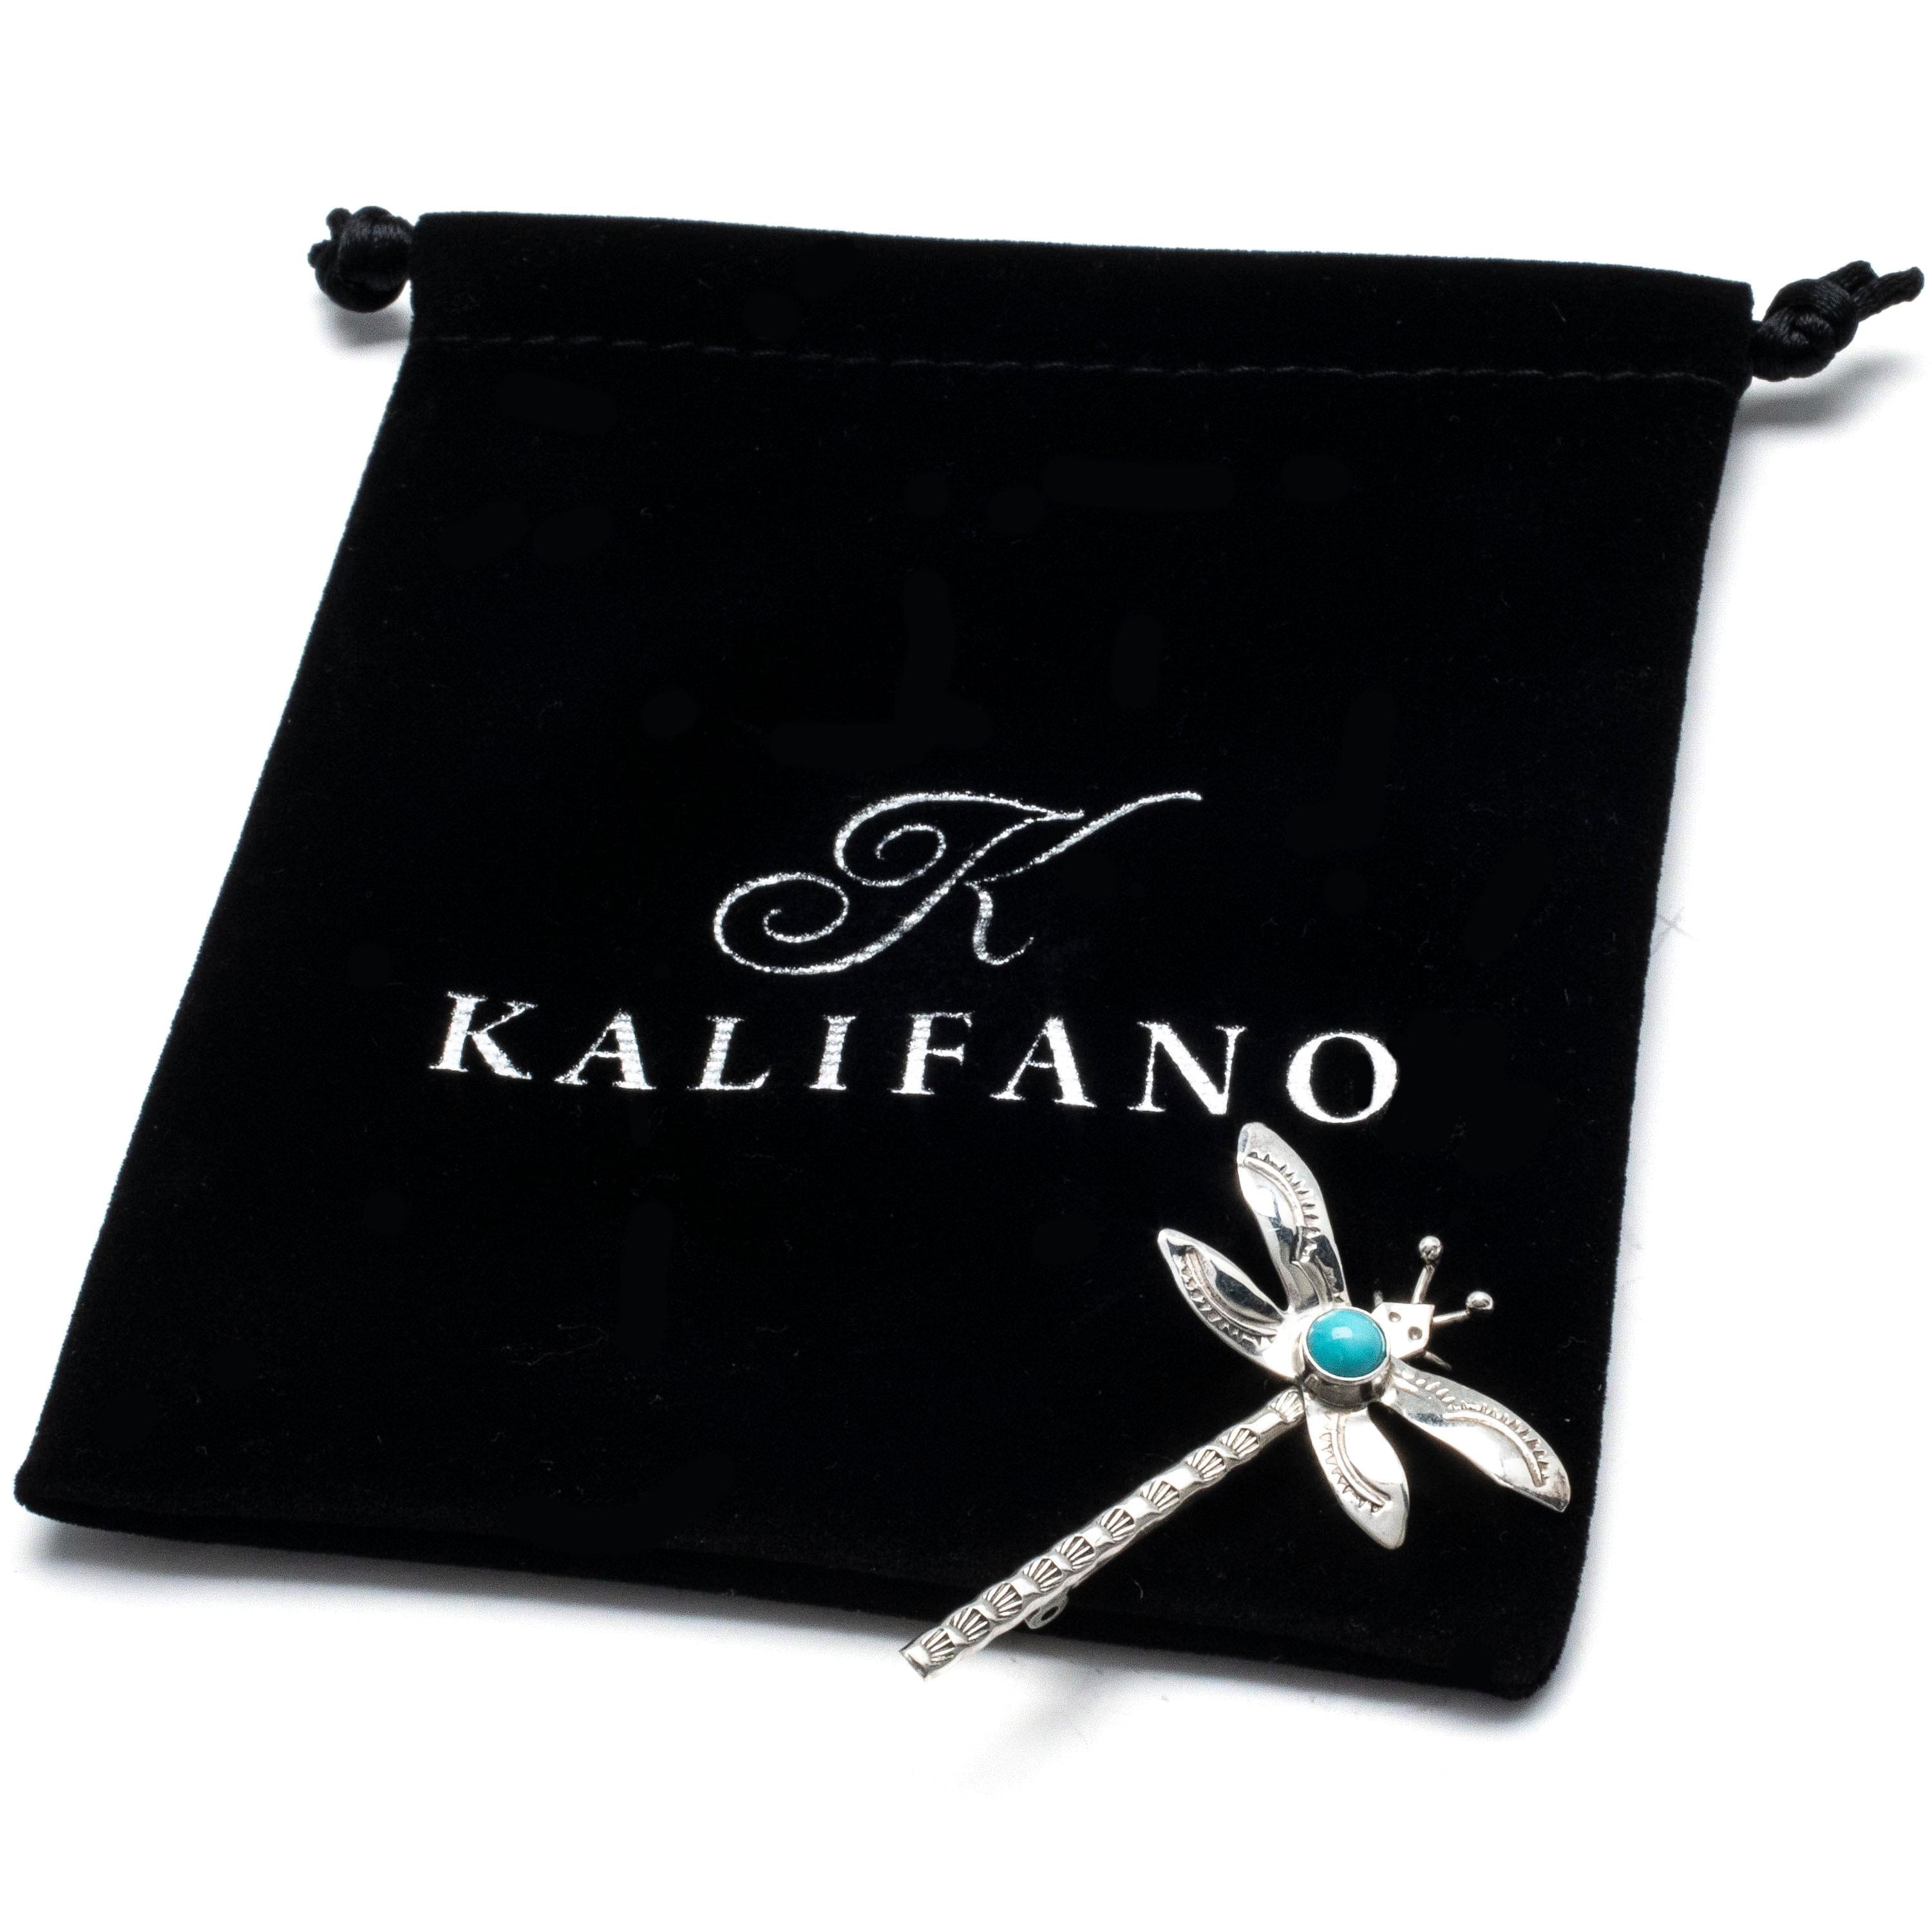 Kalifano Native American Jewelry Kingman Turquoise Dragonfly USA Native American Made 925 Sterling Silver Pin NAP250.001